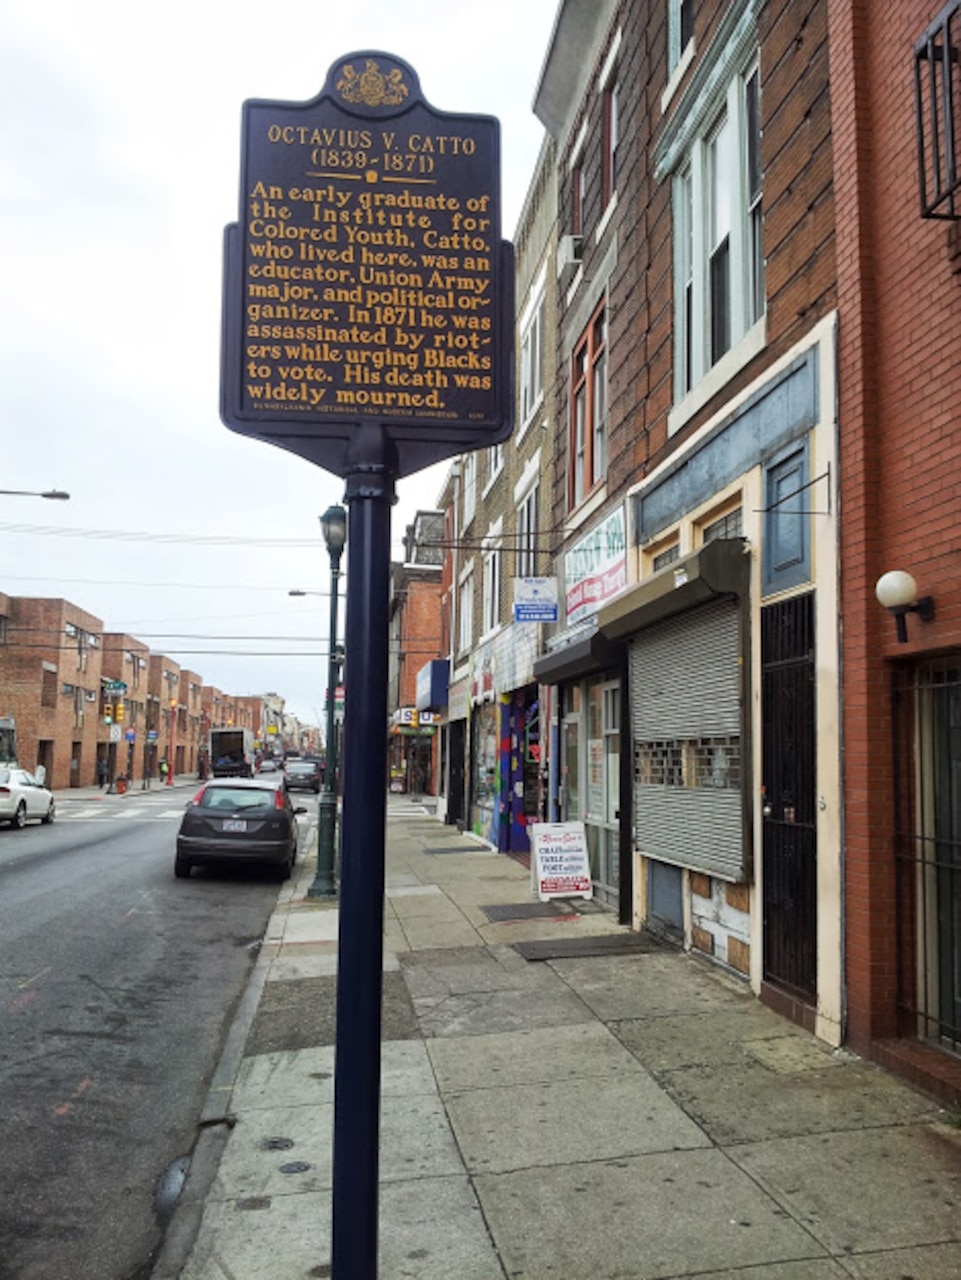 A historical marker on a city street marks the place where Octavius Catto lived.